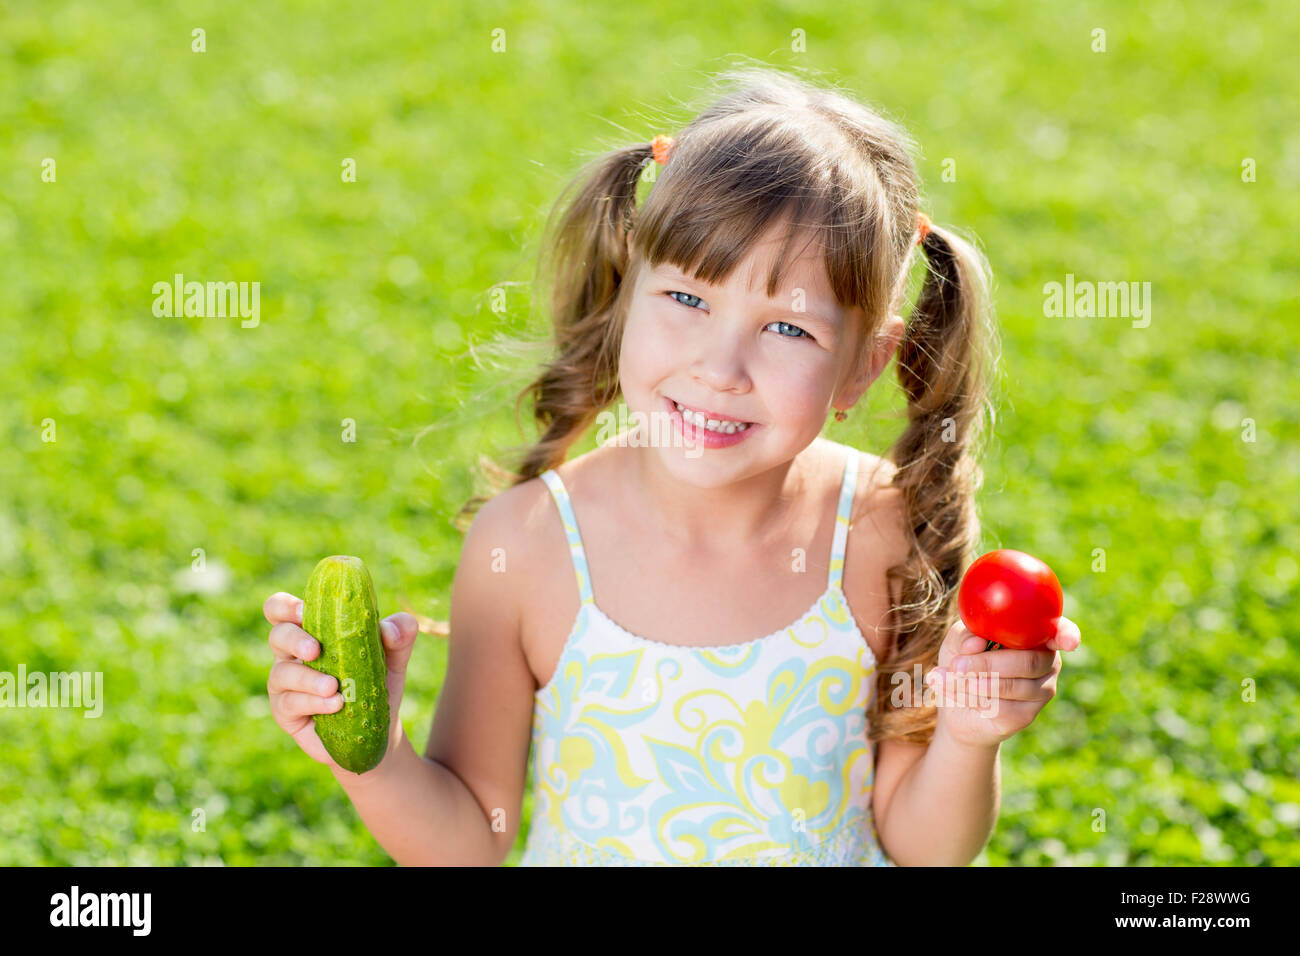 Happy child on summer grass background with healthy vegetables in hands. Stock Photo